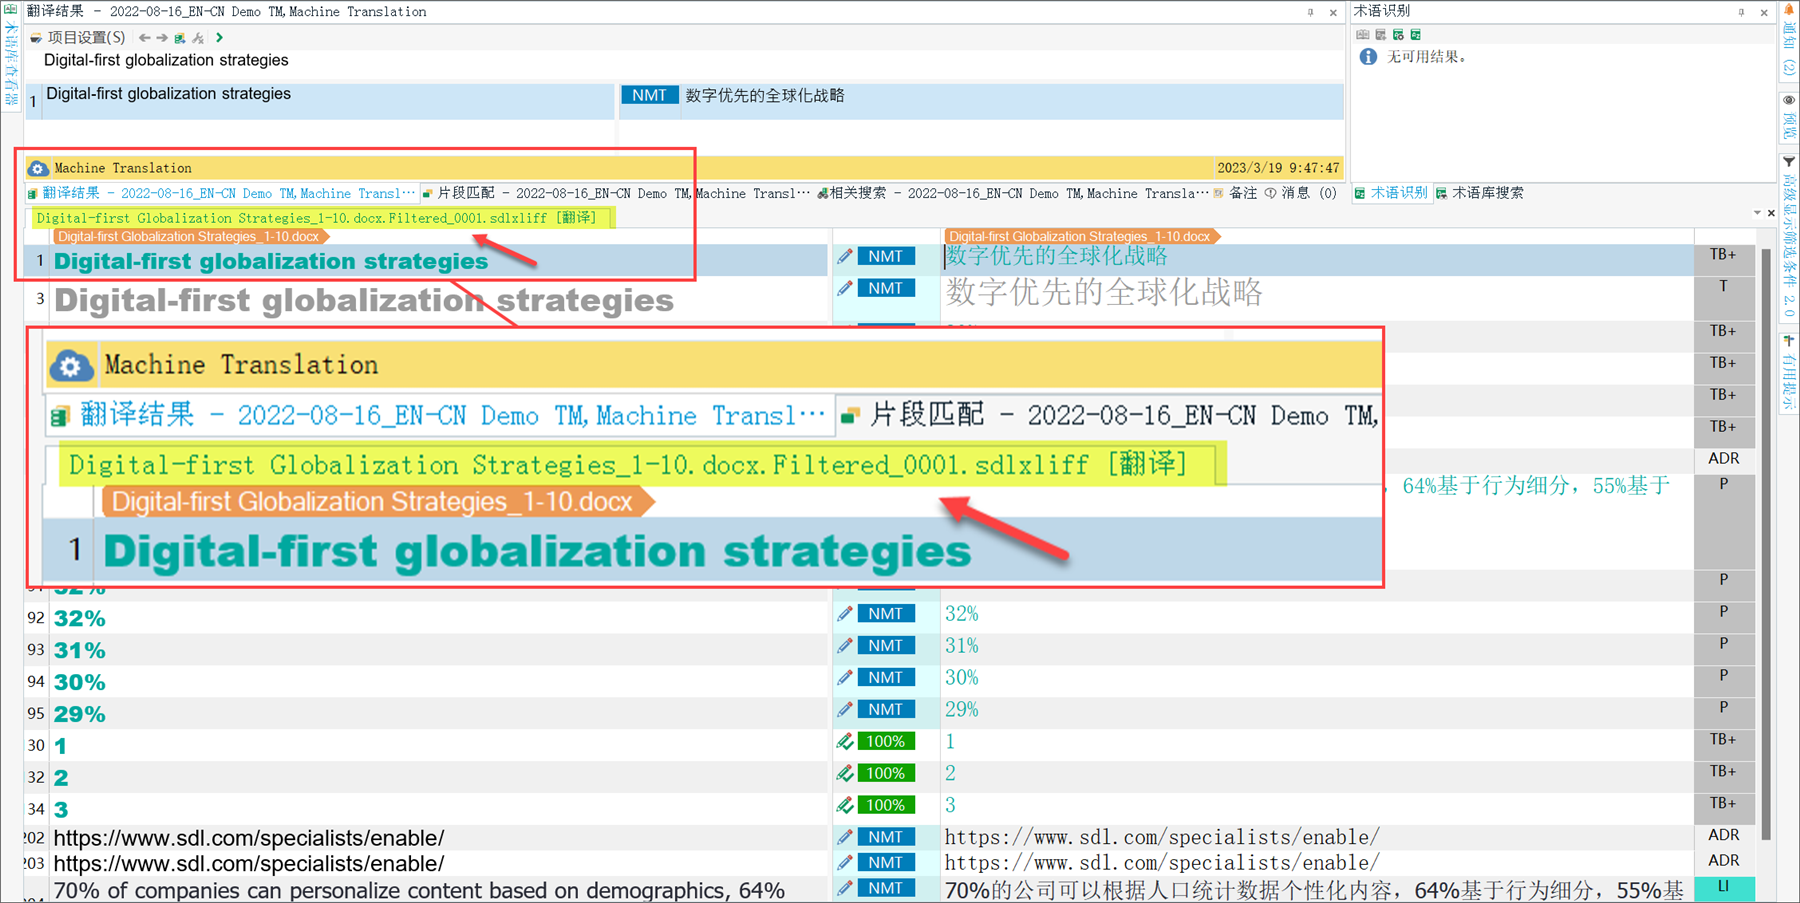 Trados Studio interface with a highlighted section showing the file 'Digital-first Globalization Strategies_1-10.docx.Filtered_0001.sdlxliff' indicating successful import as a separate file.